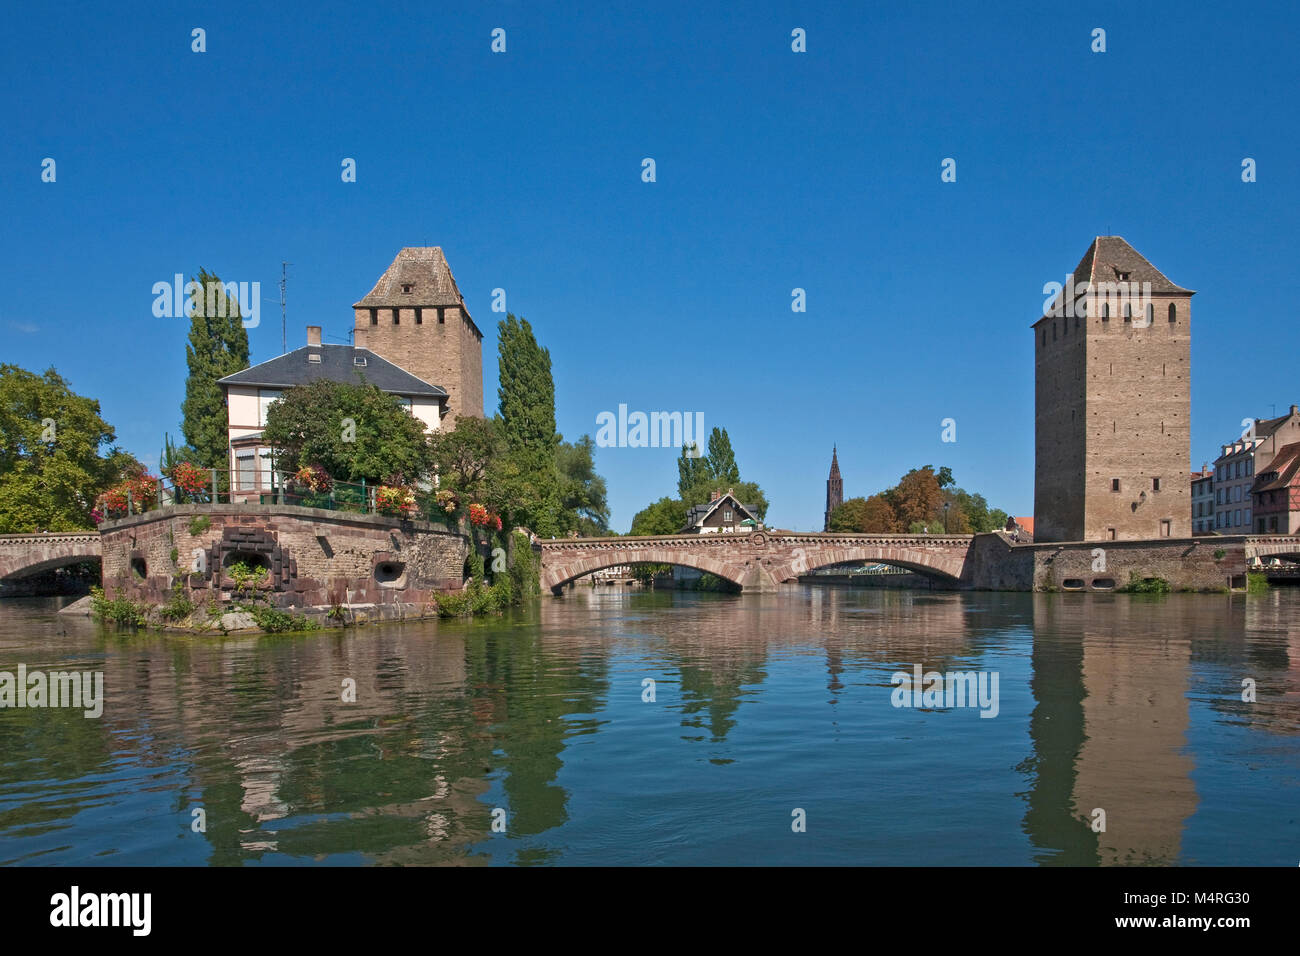 Ponts couvert, medieval bridge and towers at La Petite France (Little France), Strasbourg, Alsace, Bas-Rhin, France, Europe Stock Photo